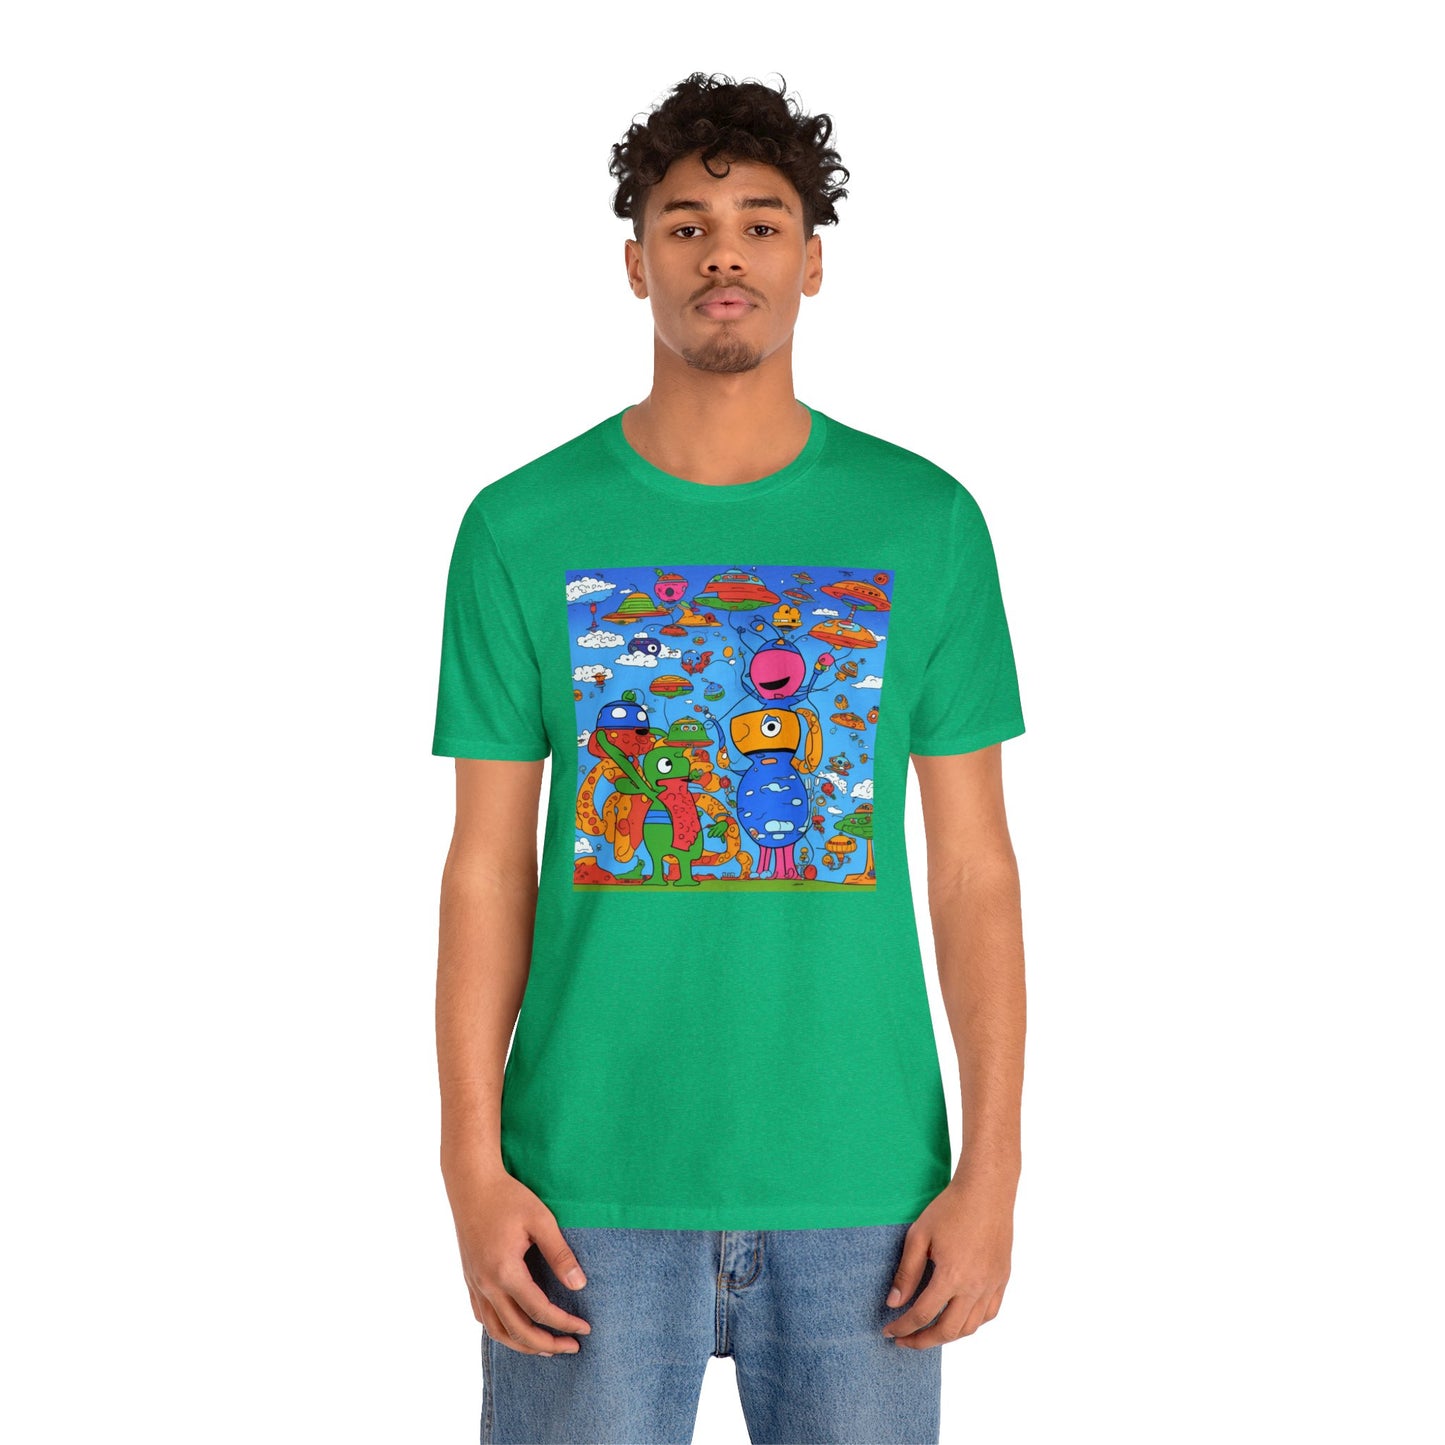 Abstraction | Abstract | Art | Colorful | Trendy | Graphic | Funny | UFO | Aliens | Tee | T-Shirt | Unisex | Men's | Women's |Short Sleeve